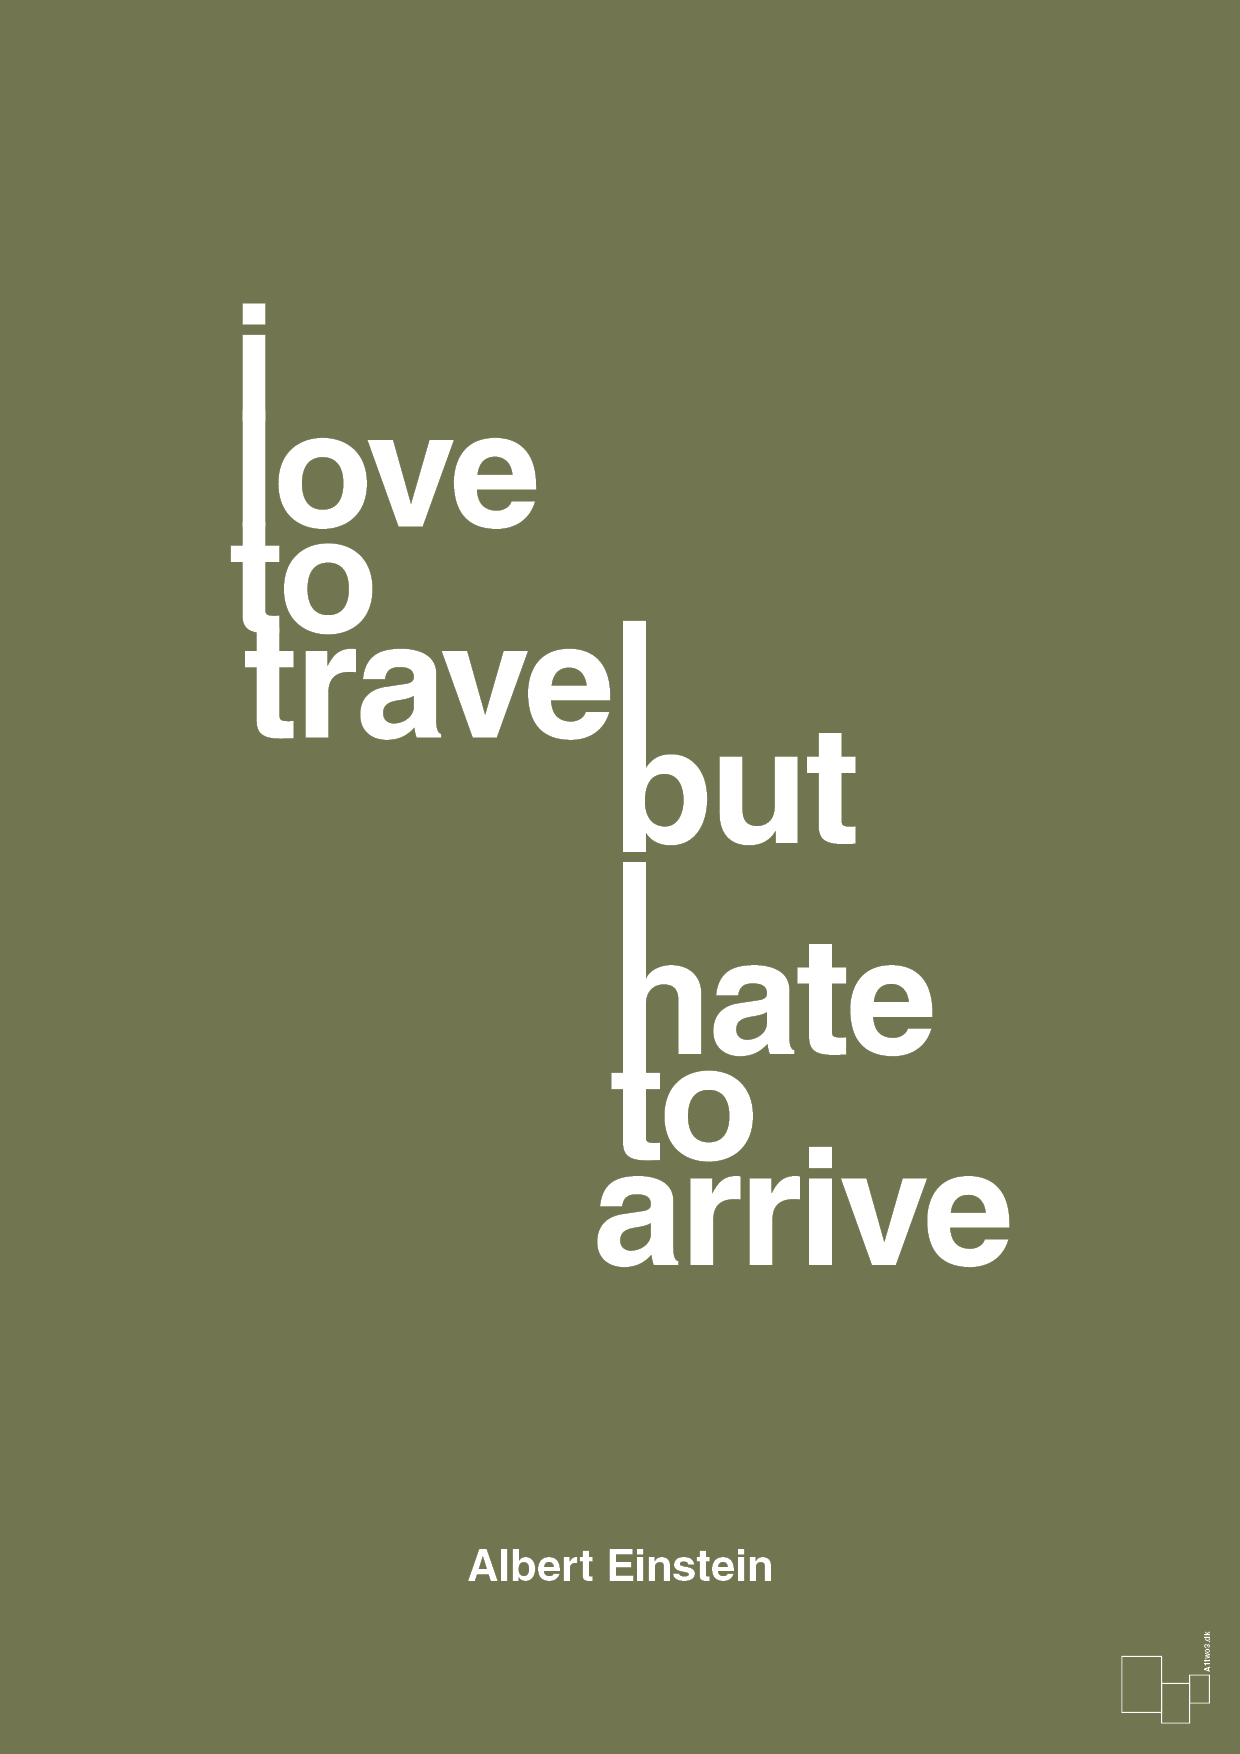 i love to travel but hate to arrive - Plakat med Citater i Secret Meadow